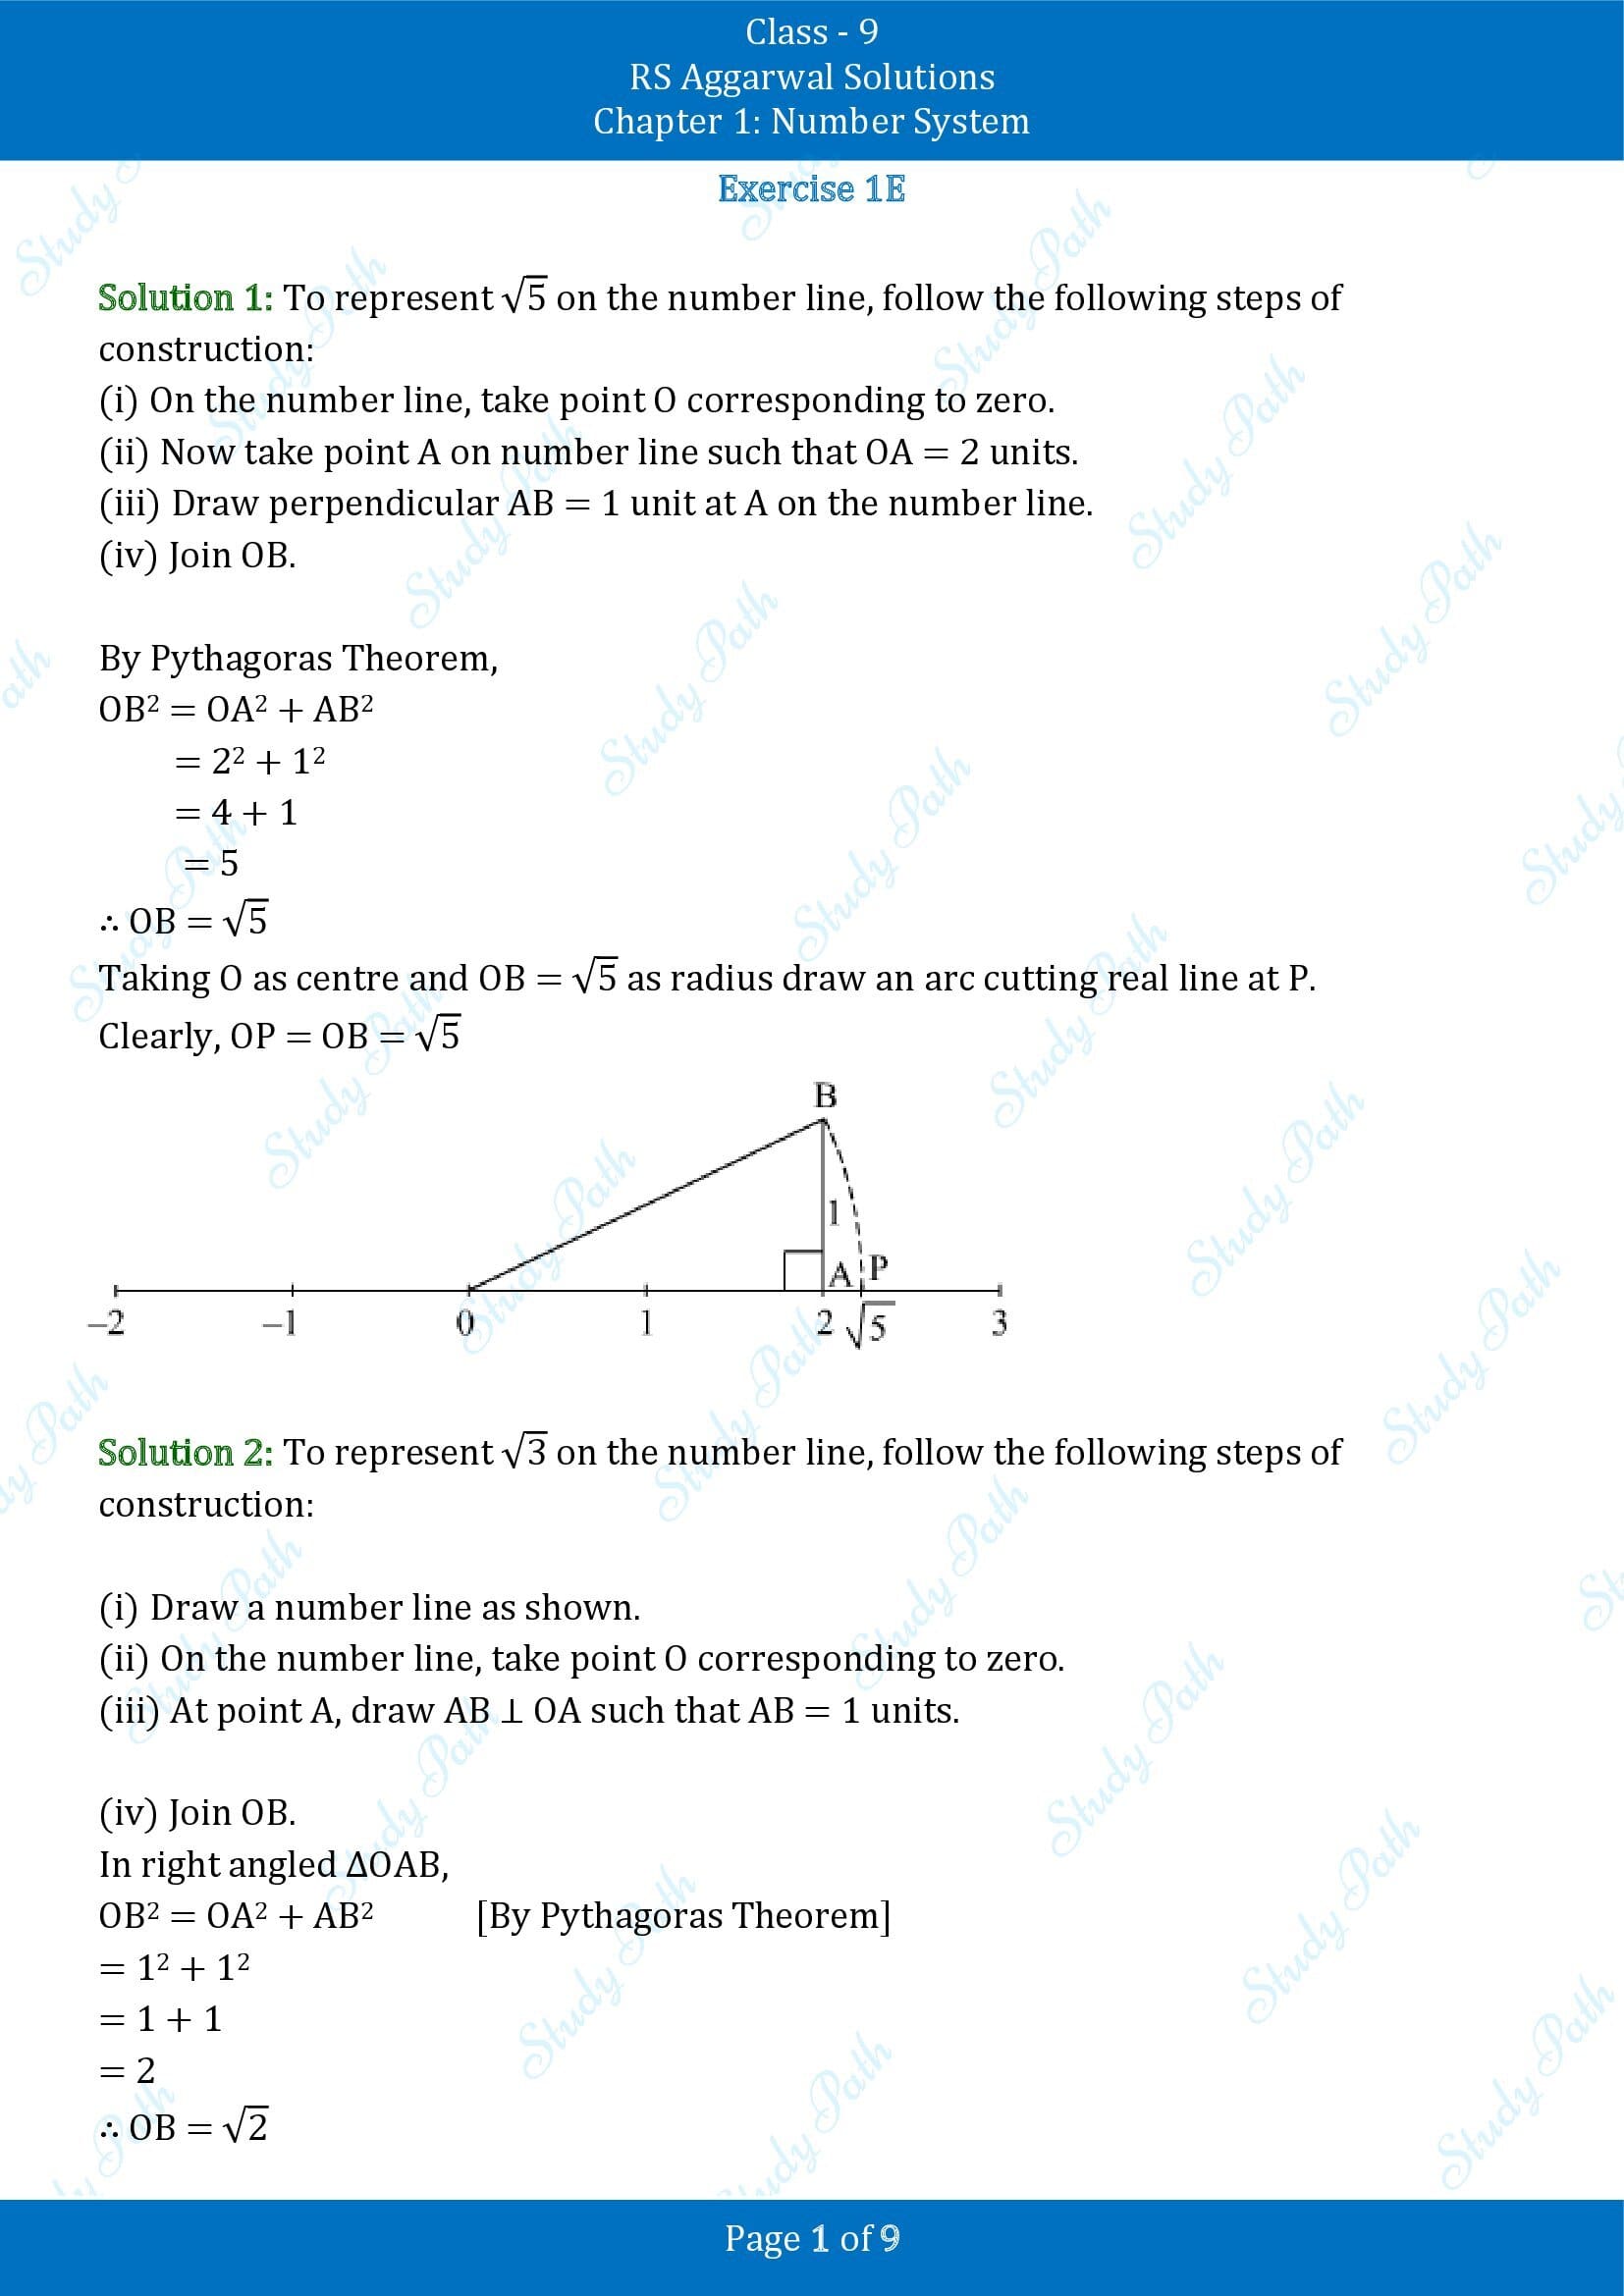 RS Aggarwal Solutions Class 9 Chapter 1 Number System Exercise 1E 00001